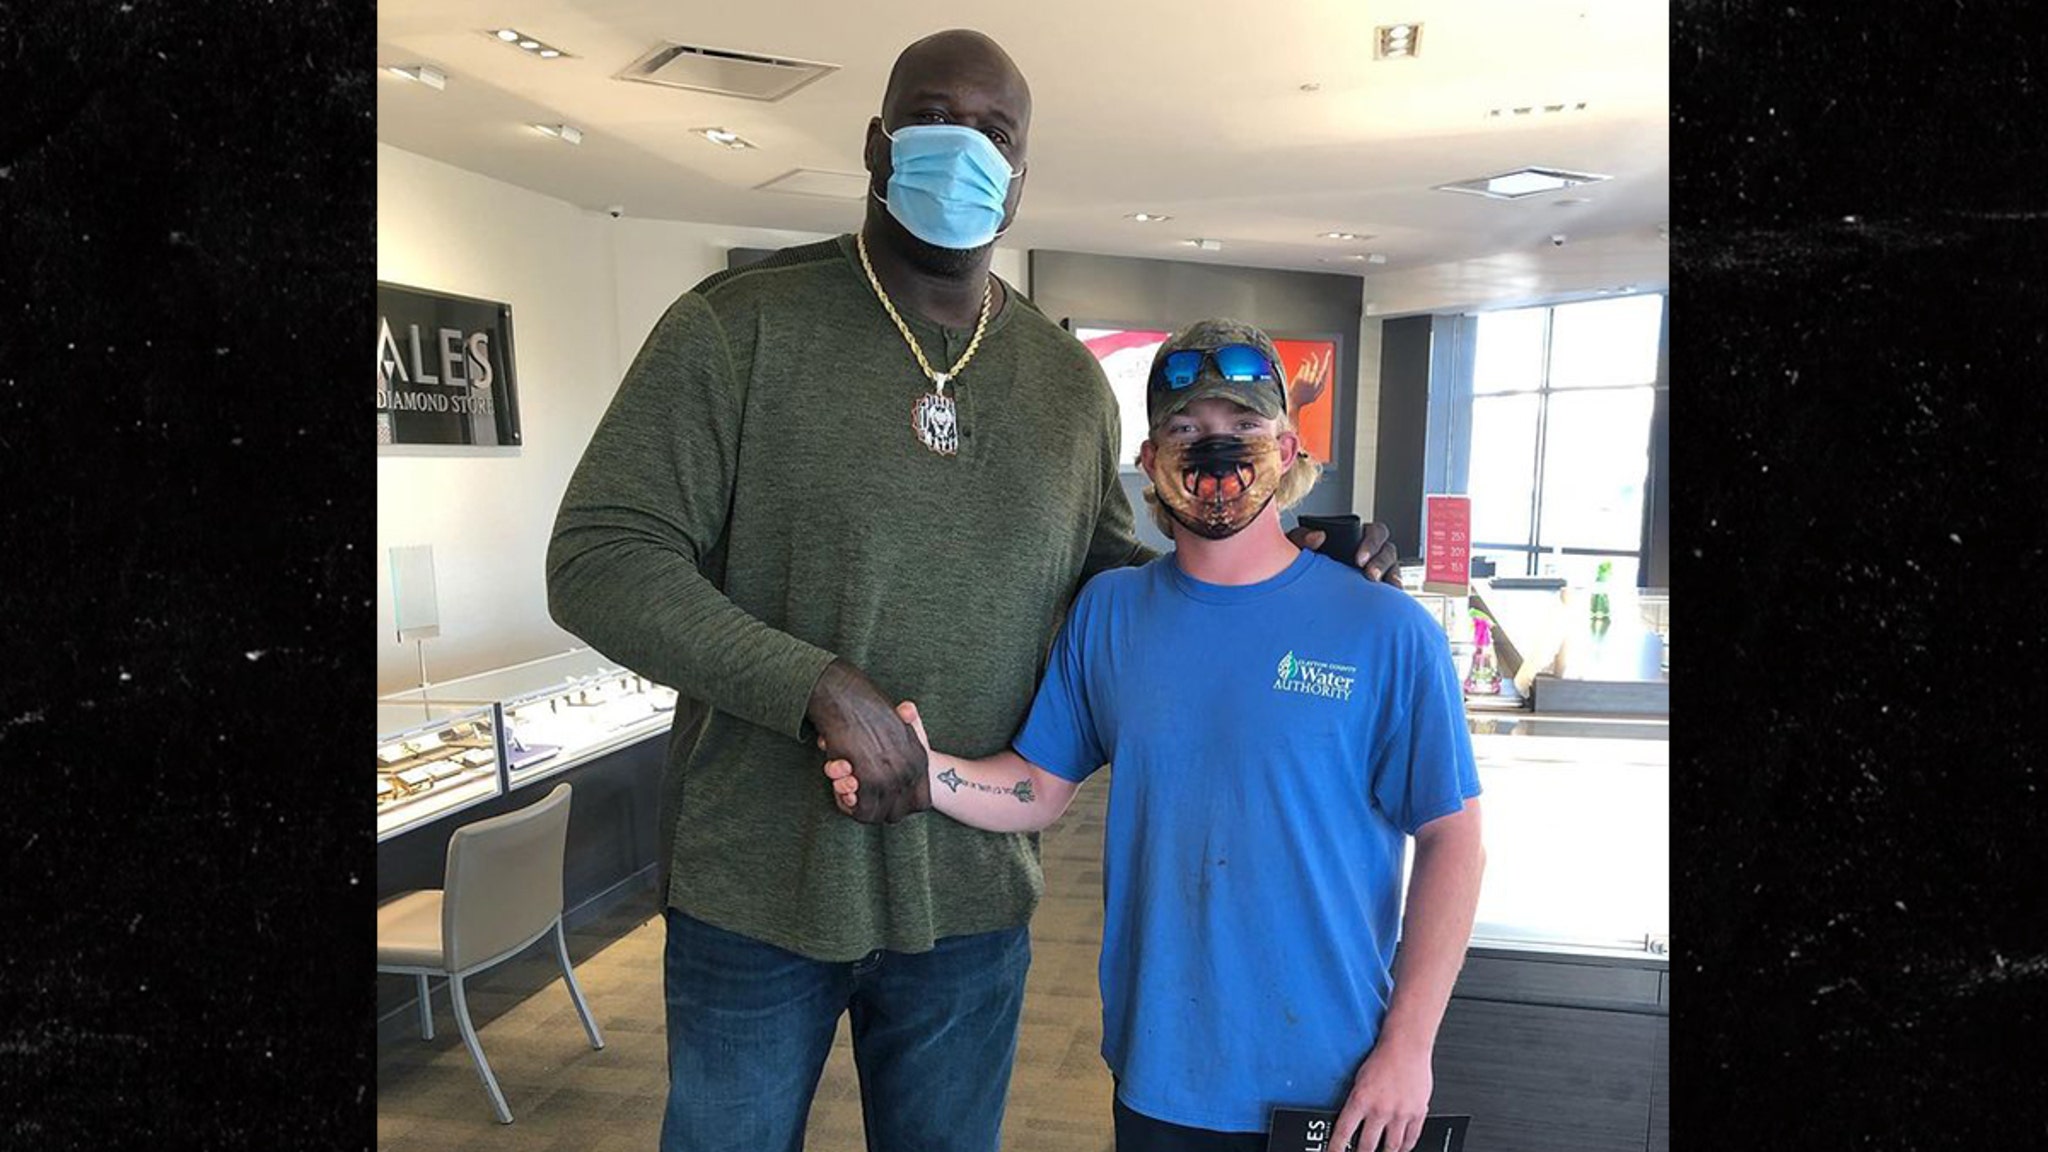 Shaq pays off the debt of the human engagement ring in generous act captured on video